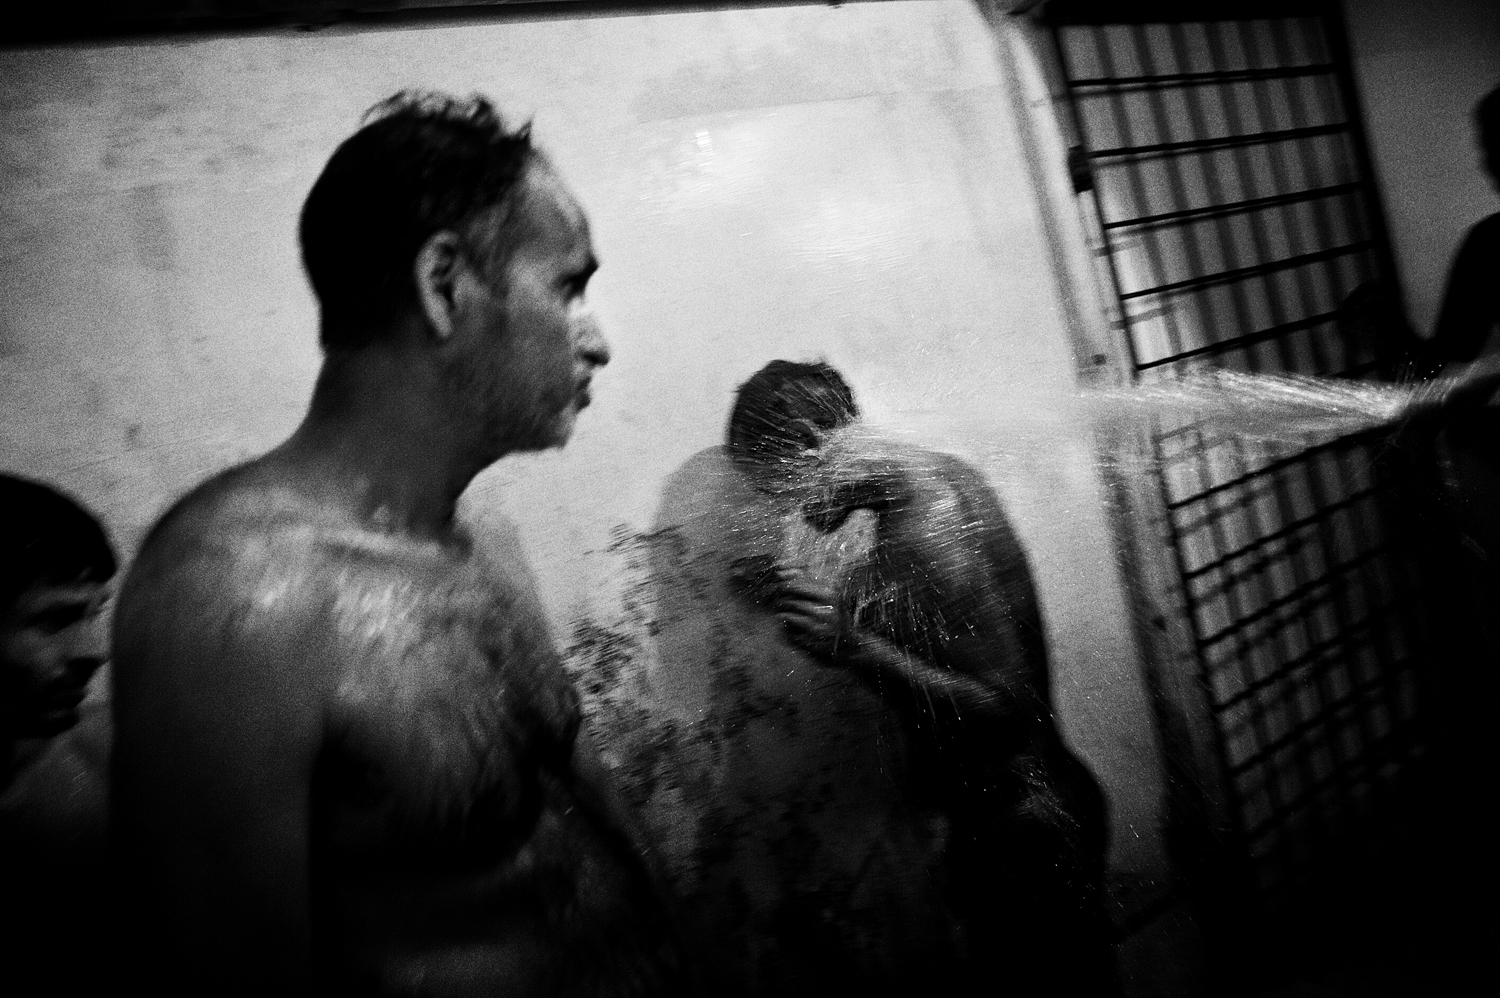 Patients suffering from suspected mental disorders in the showers, in a center run by volunteers in the town of Thodupuzha.